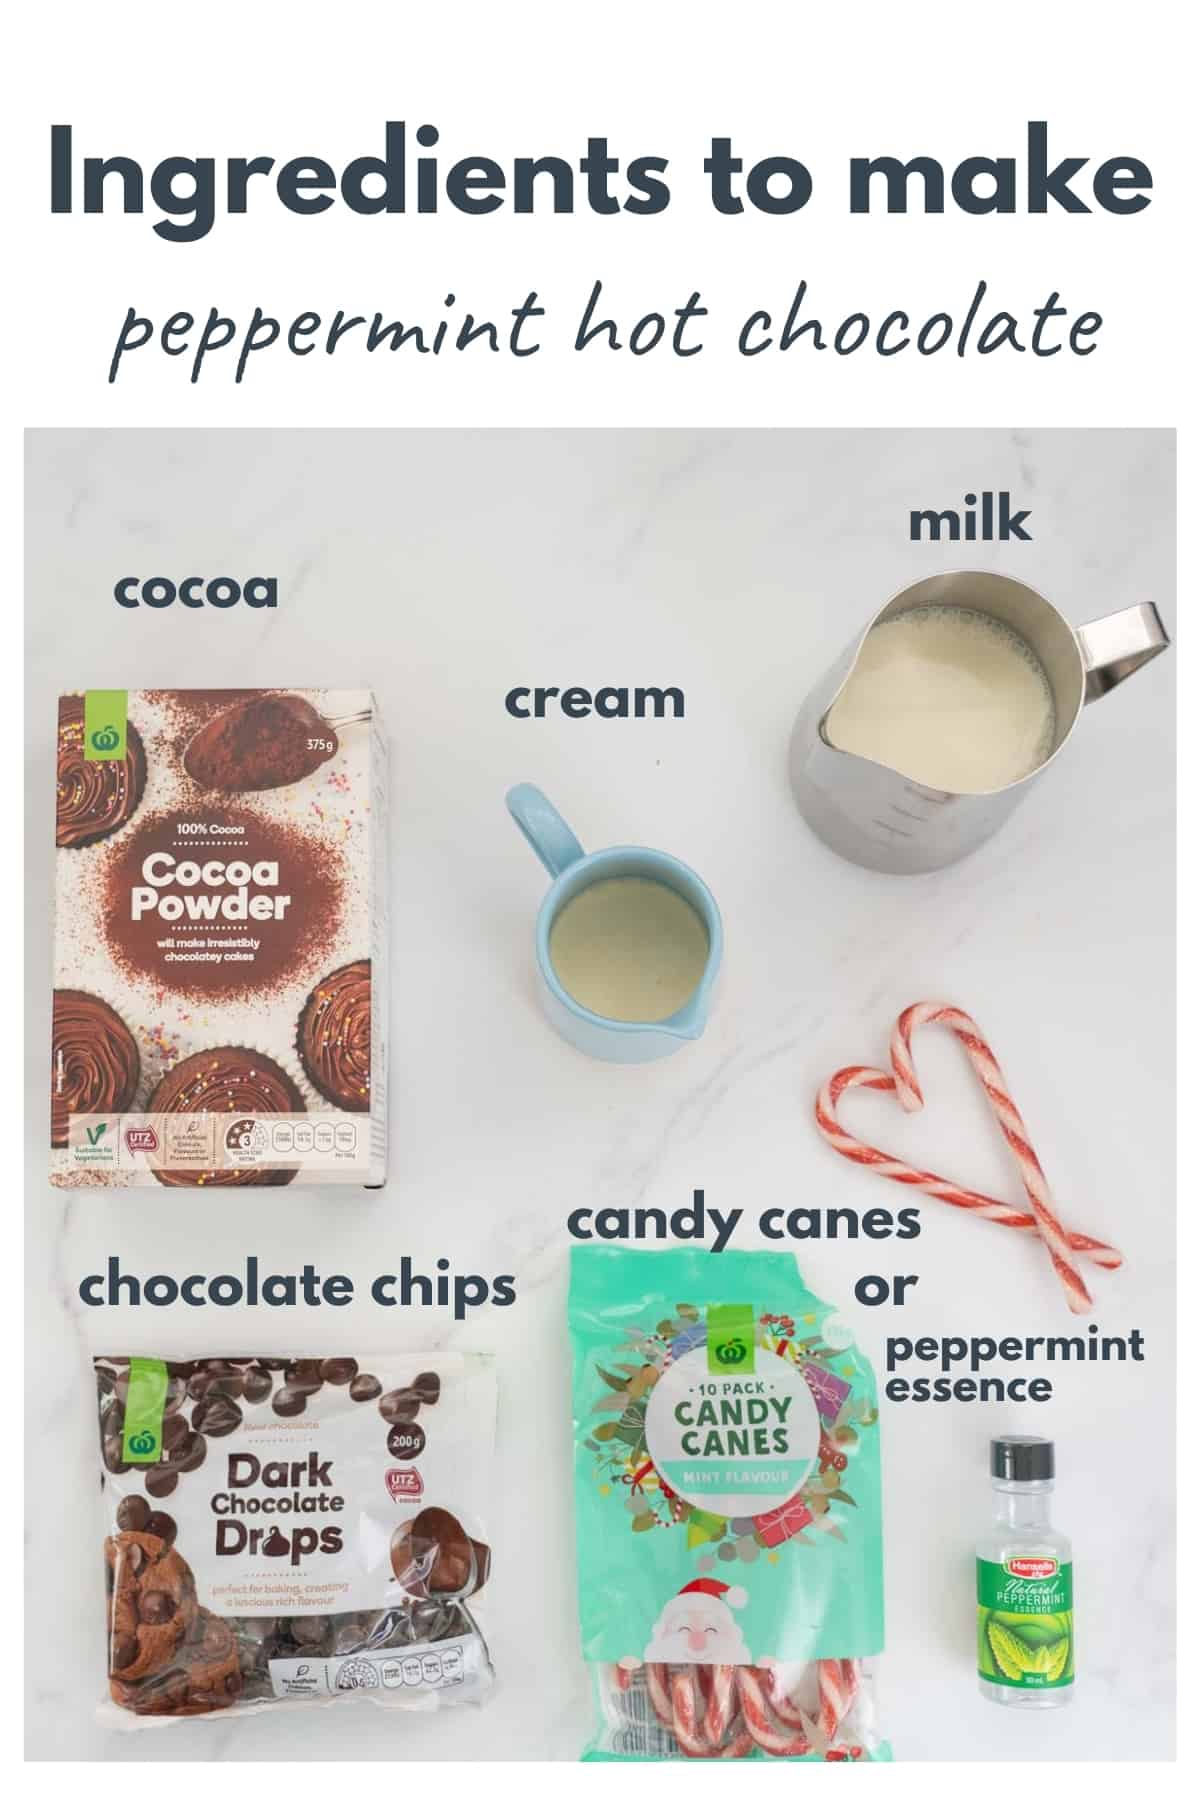 Ingredients to make peppermint hot chocolate laid out on a bench top with text overlay.